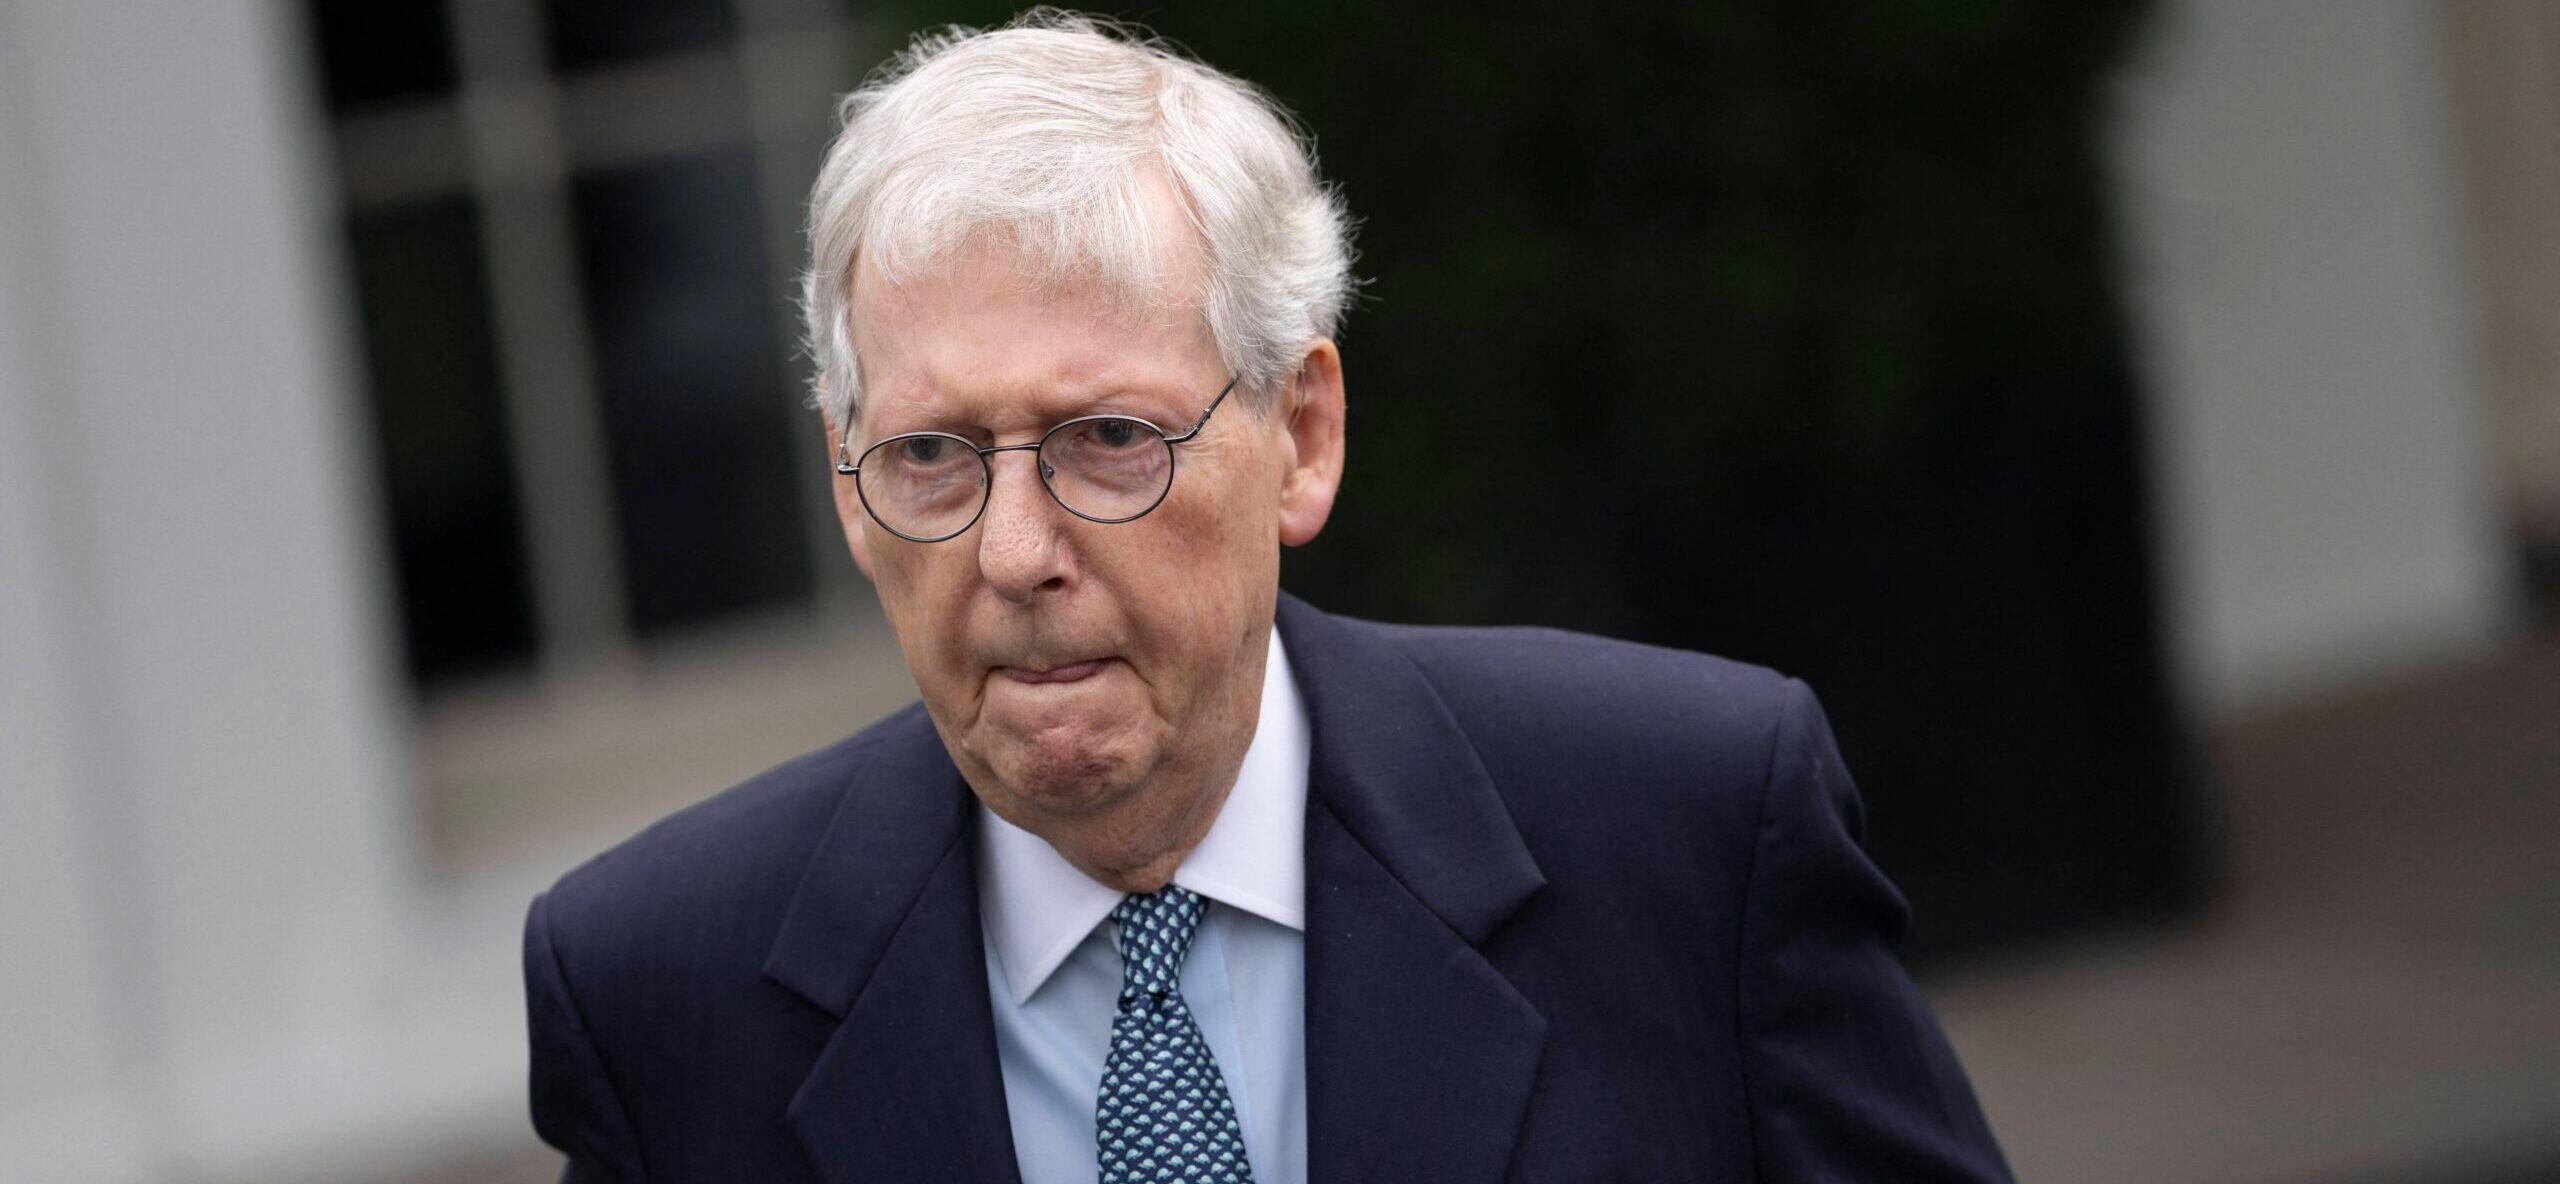 Mitch McConnell Claims He Is 'Fine' After Freezing Mid-Speech During Press Conference